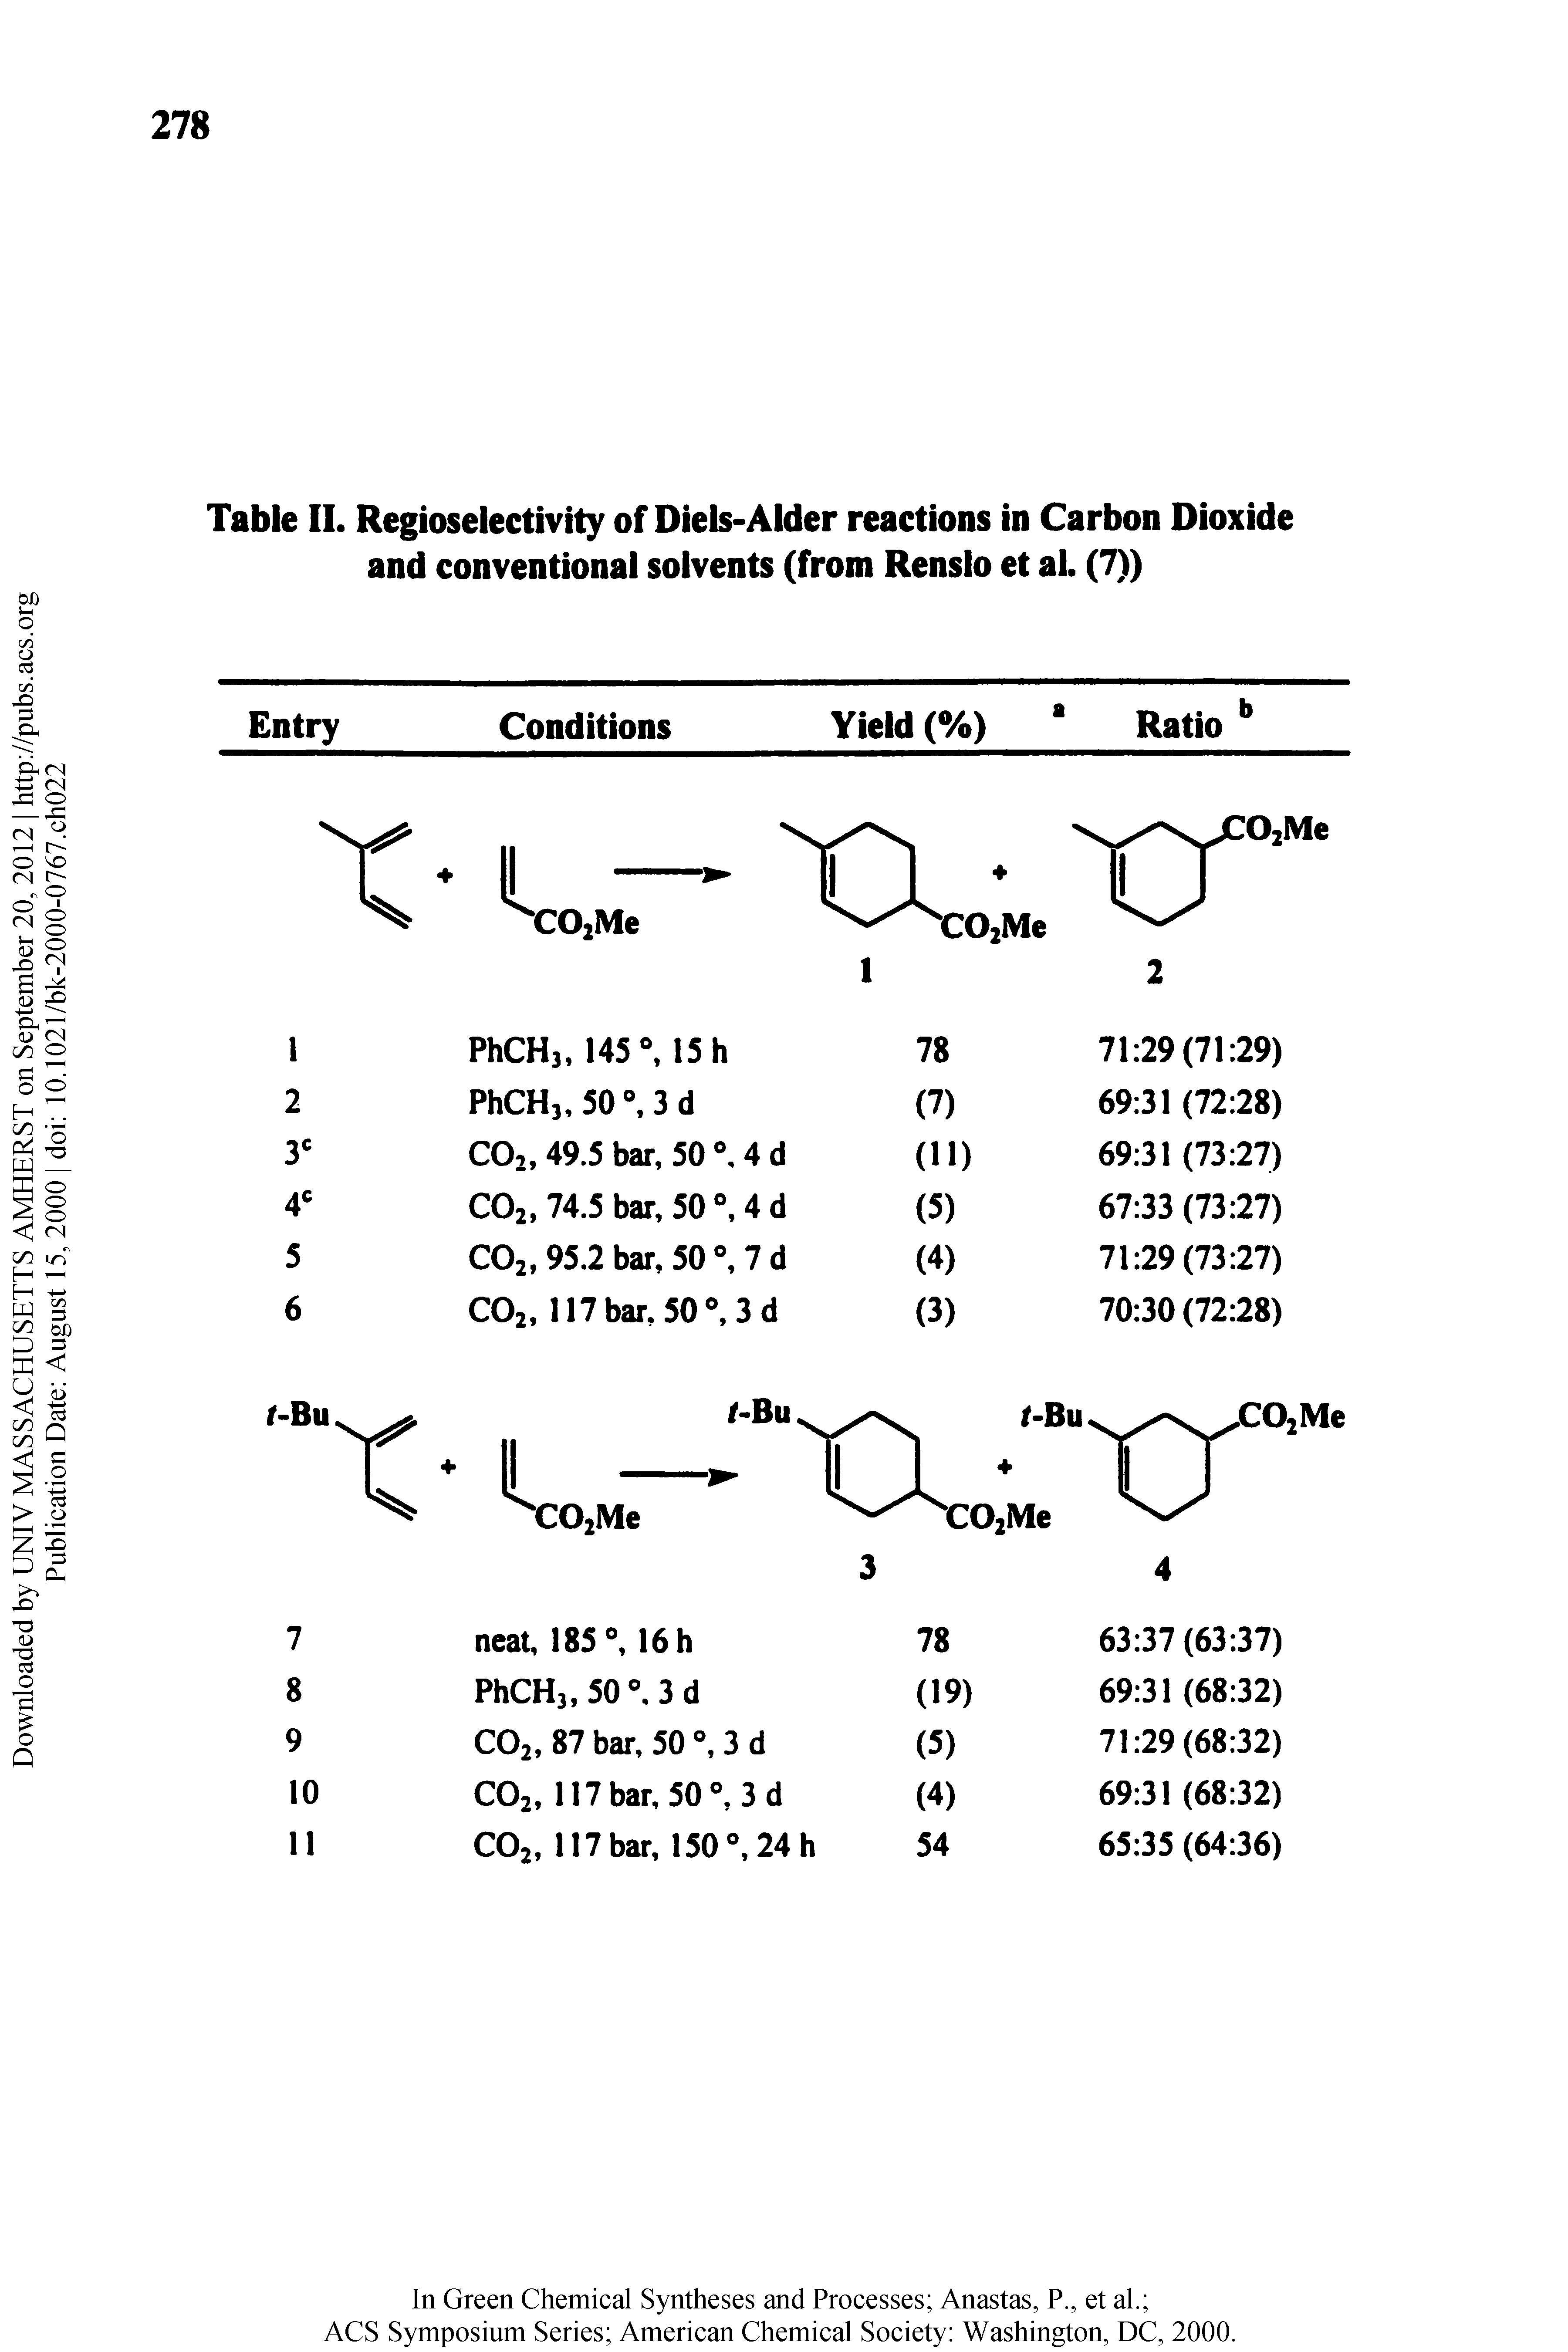 Table II. Regioseiectivity of Diels-Alder reactions in Carbon Dioxide and conventional solvents (from Renslo et al. (7))...